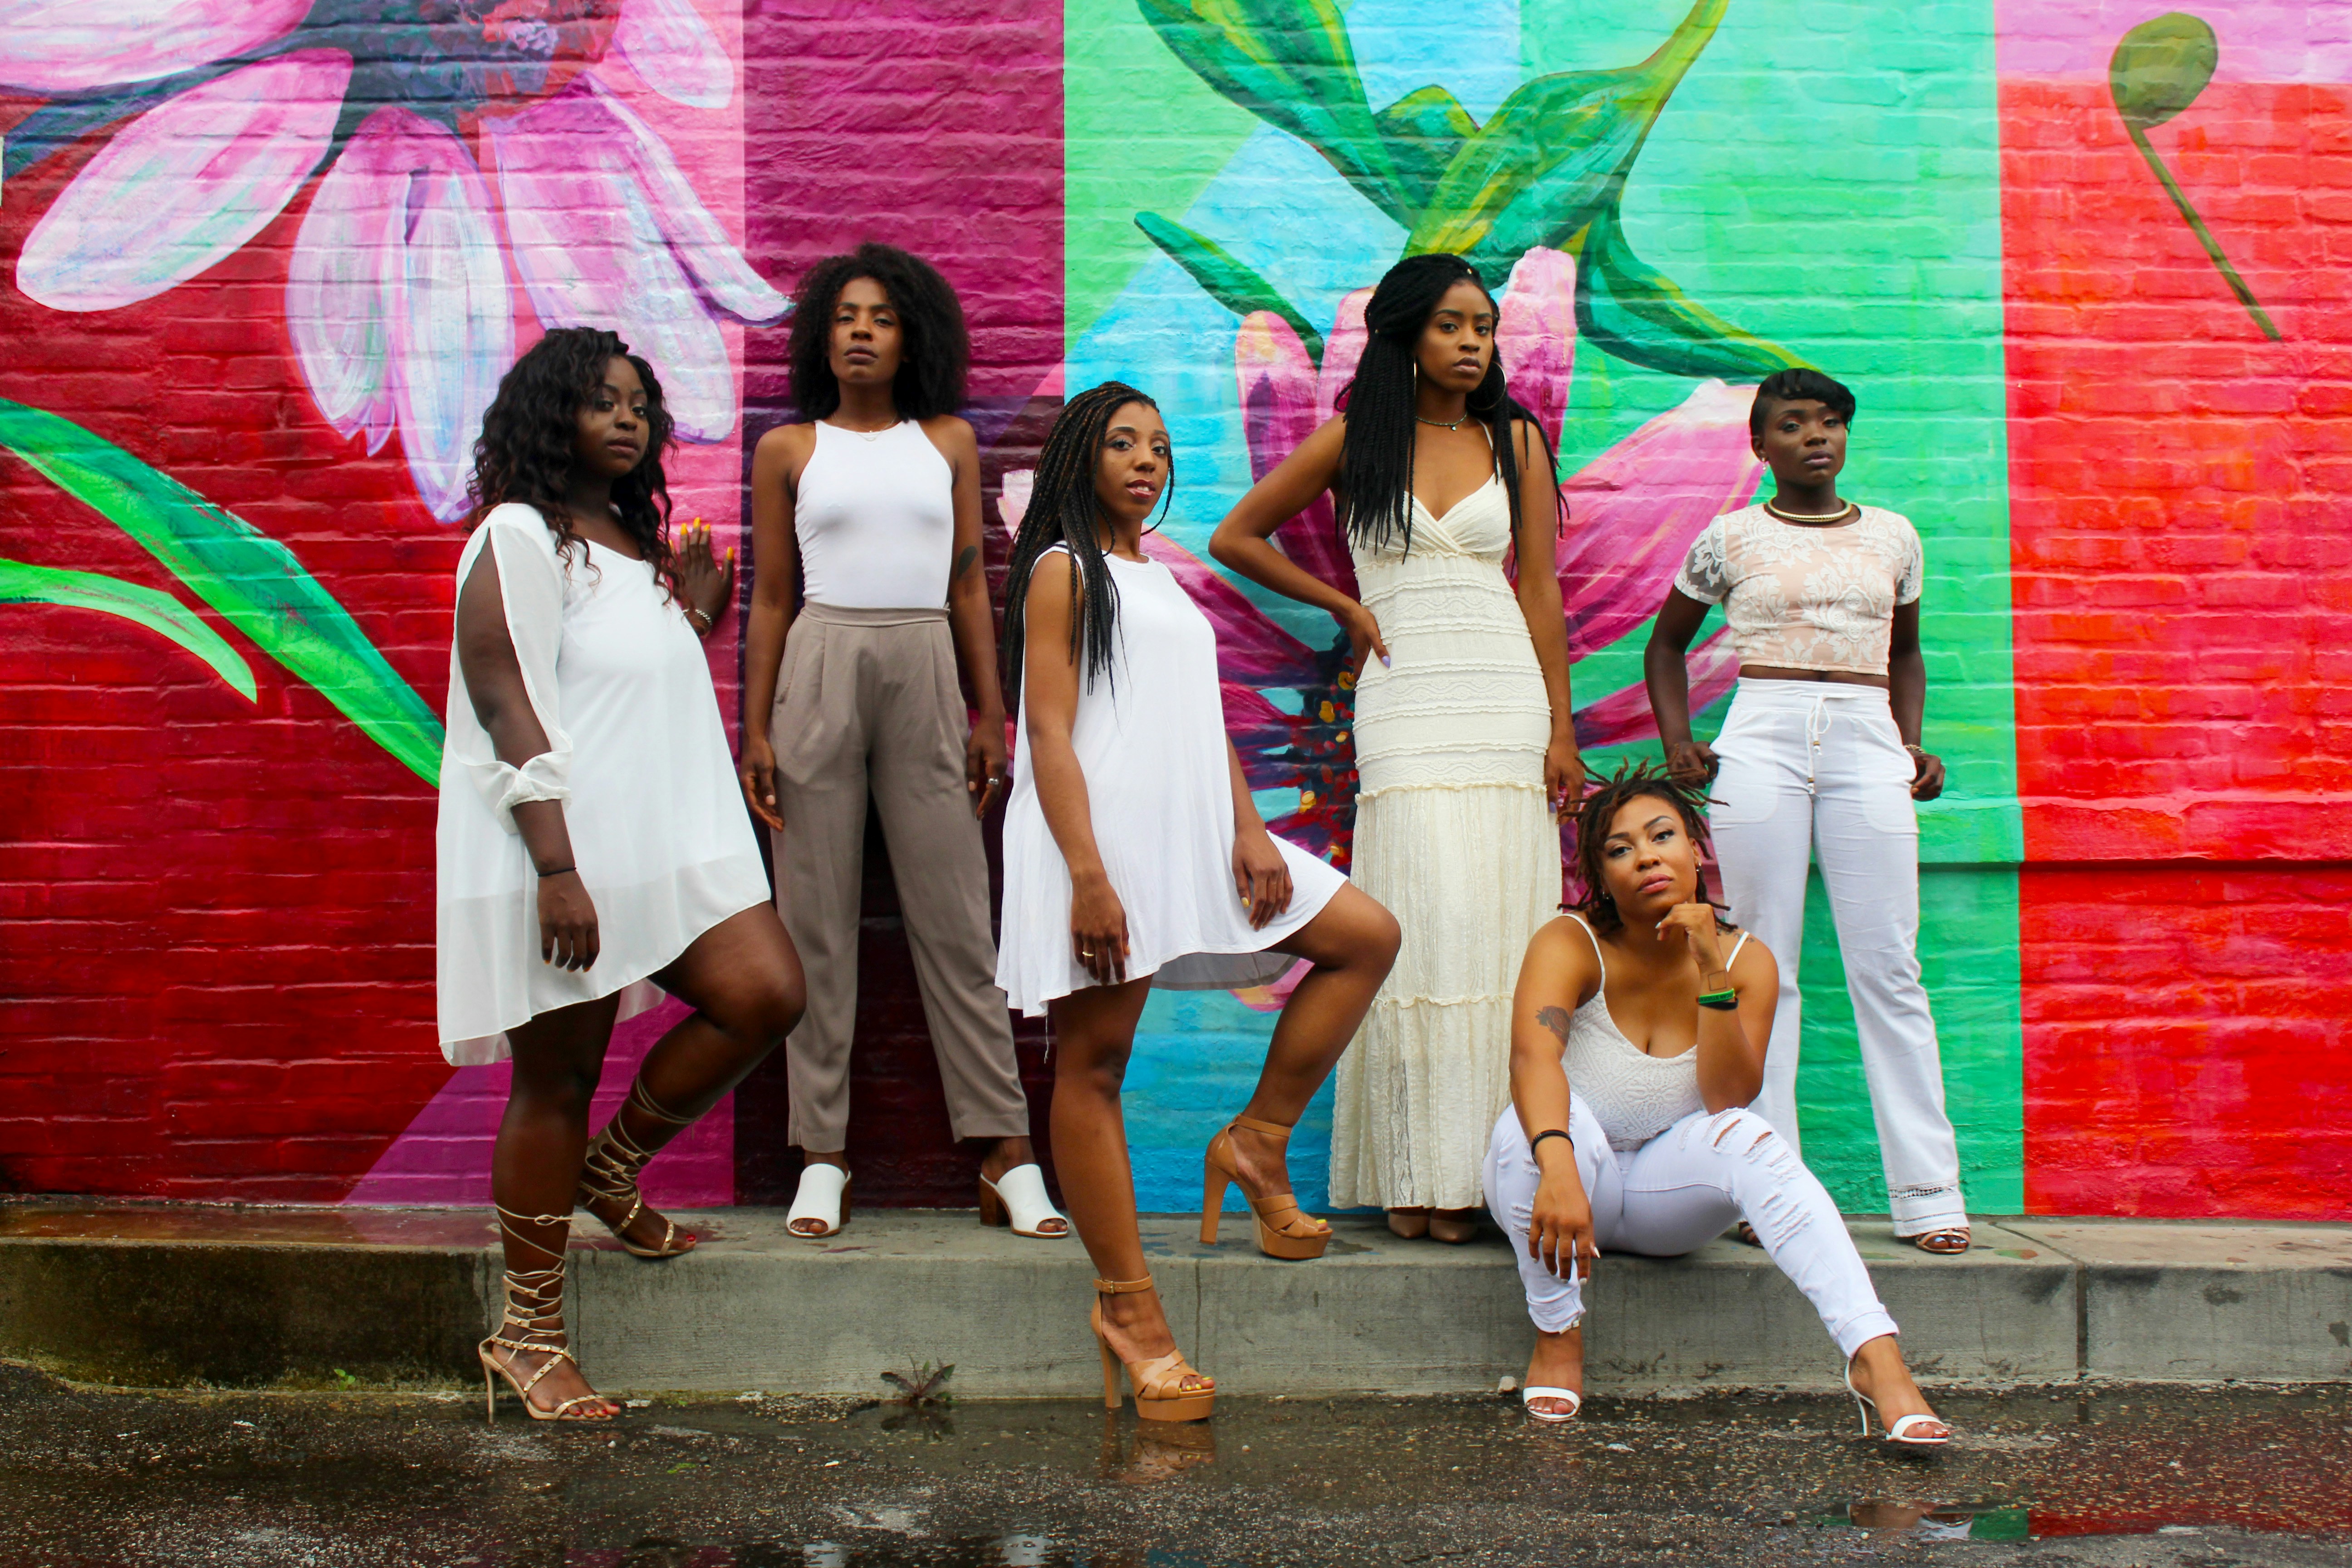 great photo recipe,how to photograph i had the pleasure of shooting this beautiful women in uptown minneapolis. the focus of the shoot was for a friend to use for promotional purposes for an organization she works with but also for black women to feel beautiful and empowered in a world that tells them they are worthless.; six women wearing white pants posing